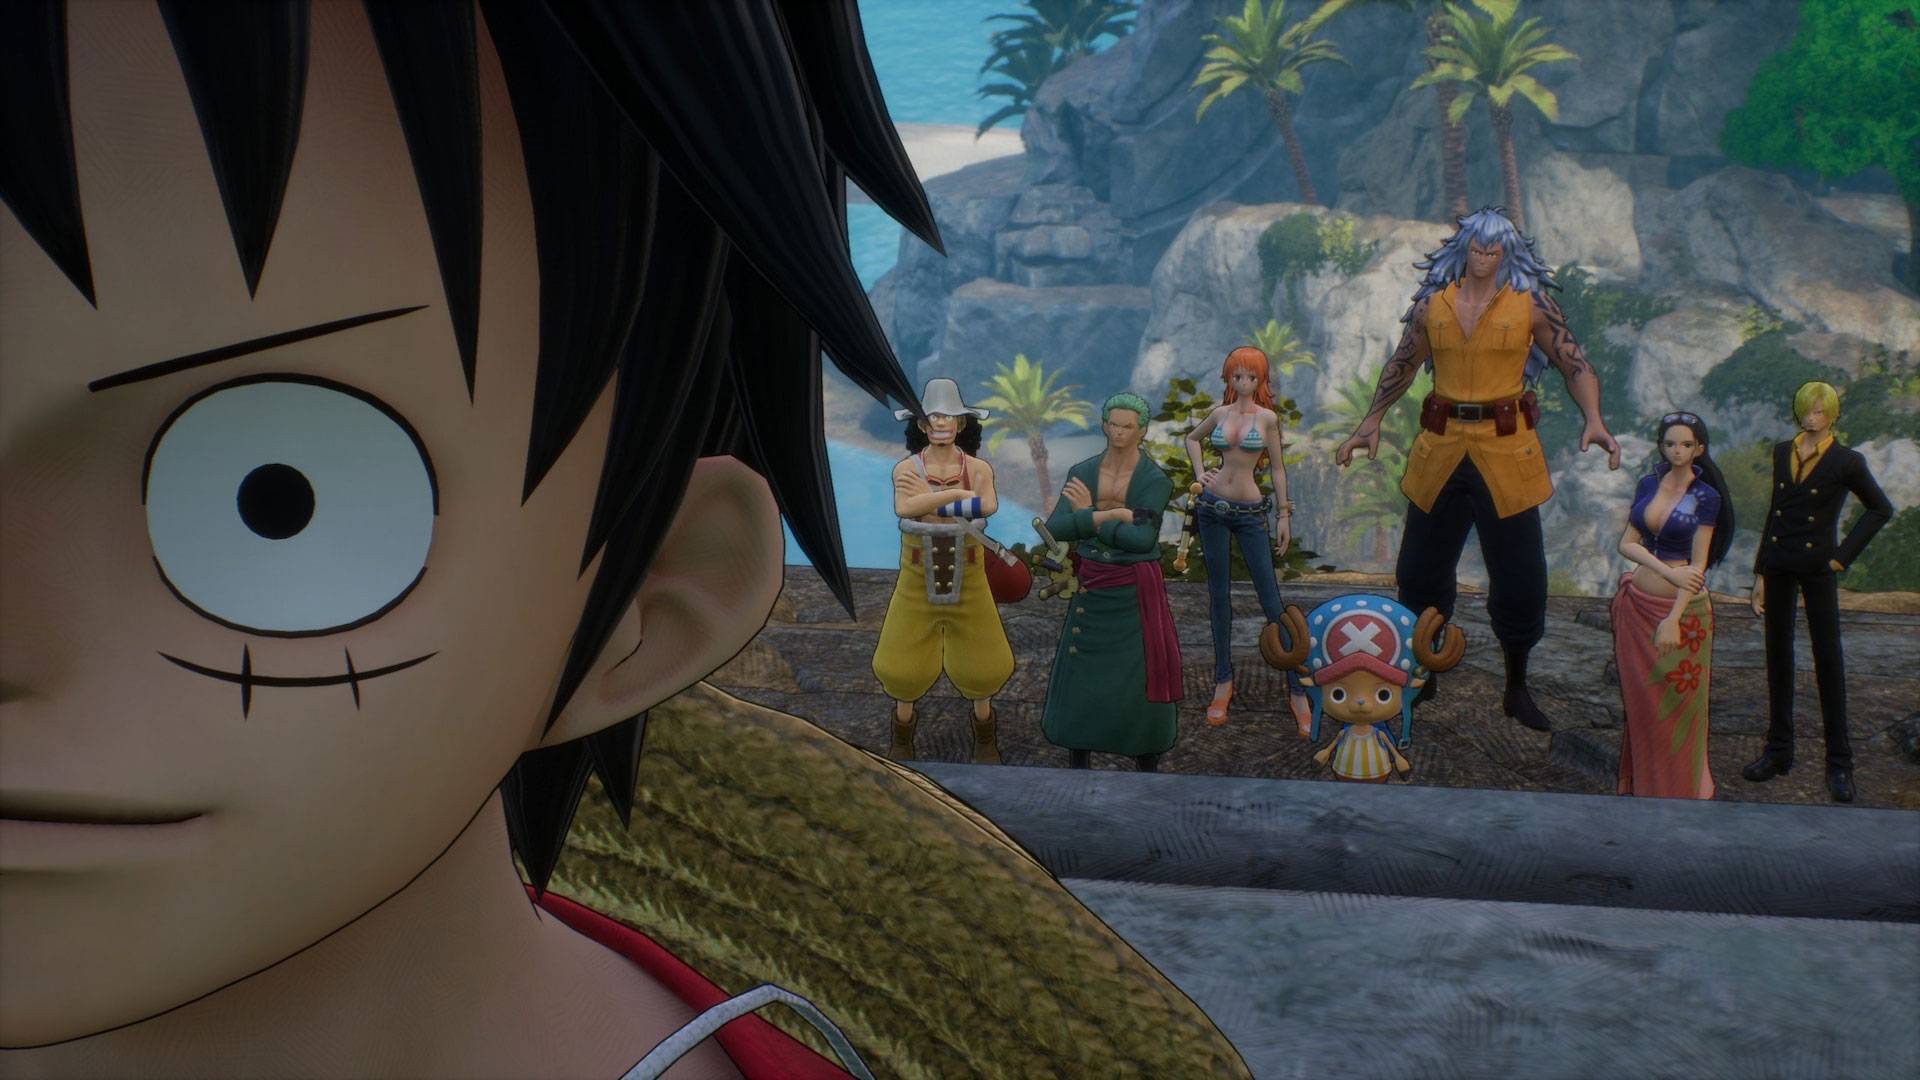 Is One Piece Odyssey Coming to Xbox Game Pass? - GameRevolution